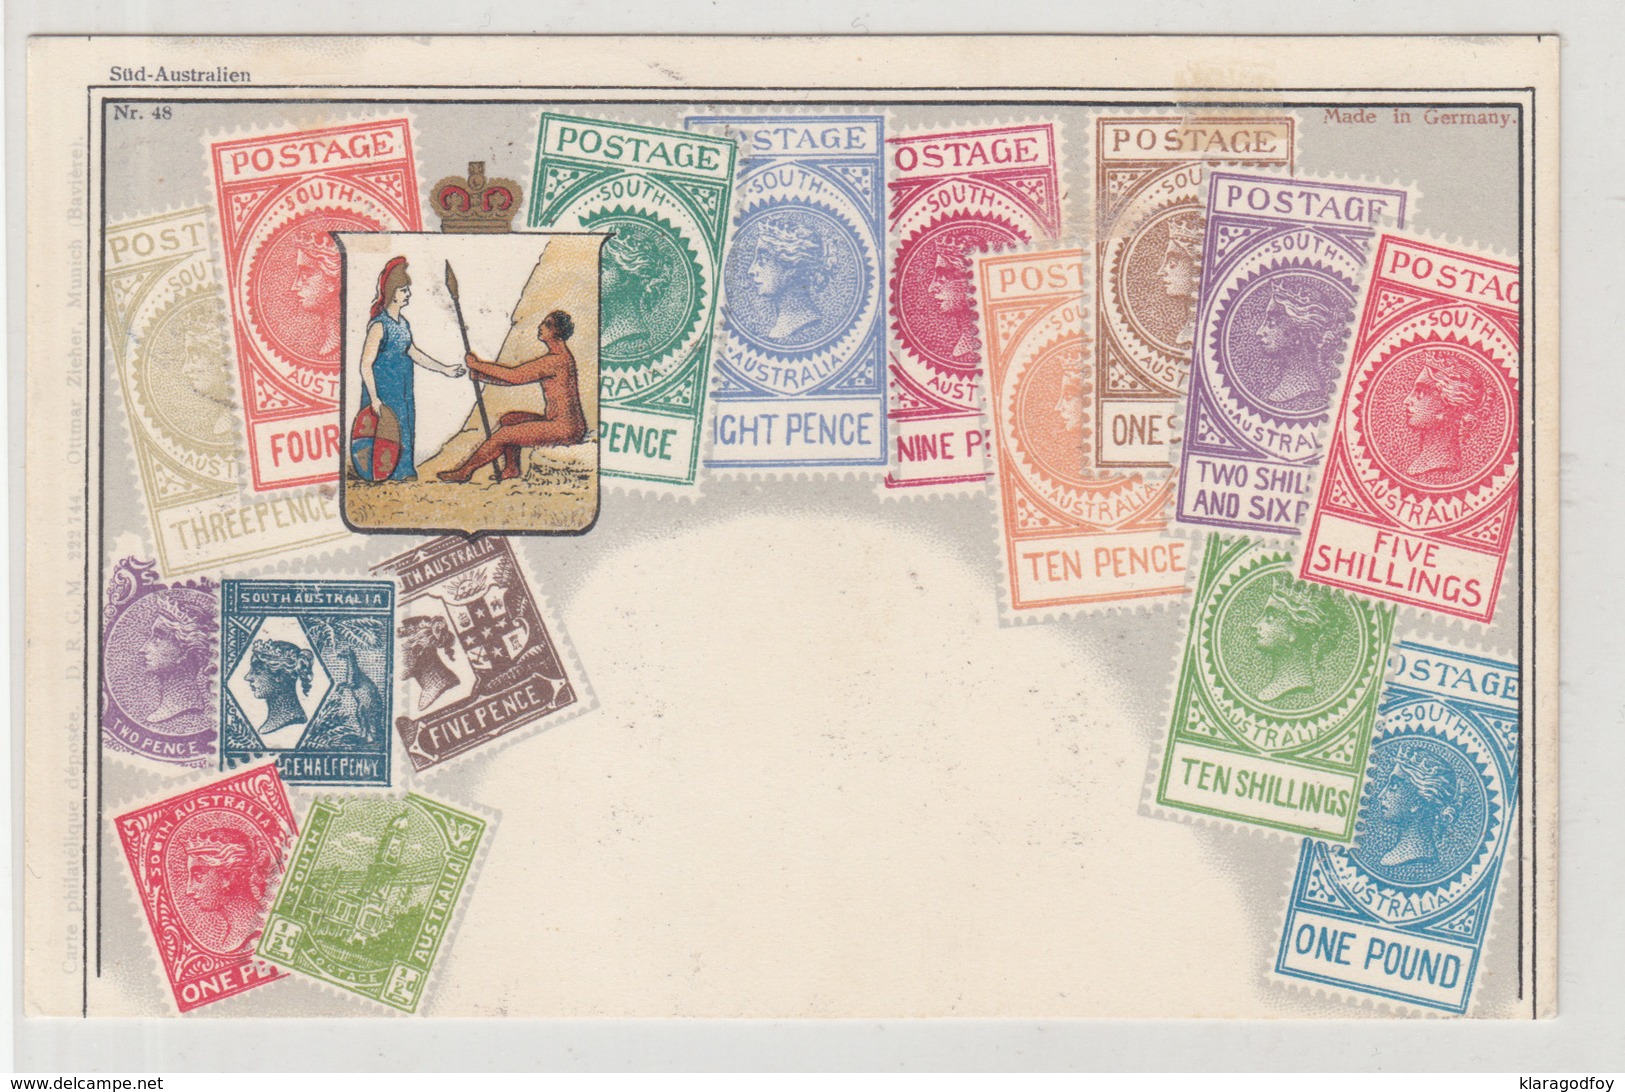 Mixed Franking France German Reich On Postcard Of South Australian Stamps Postmark 1940 Ottrot B190220 - Covers & Documents